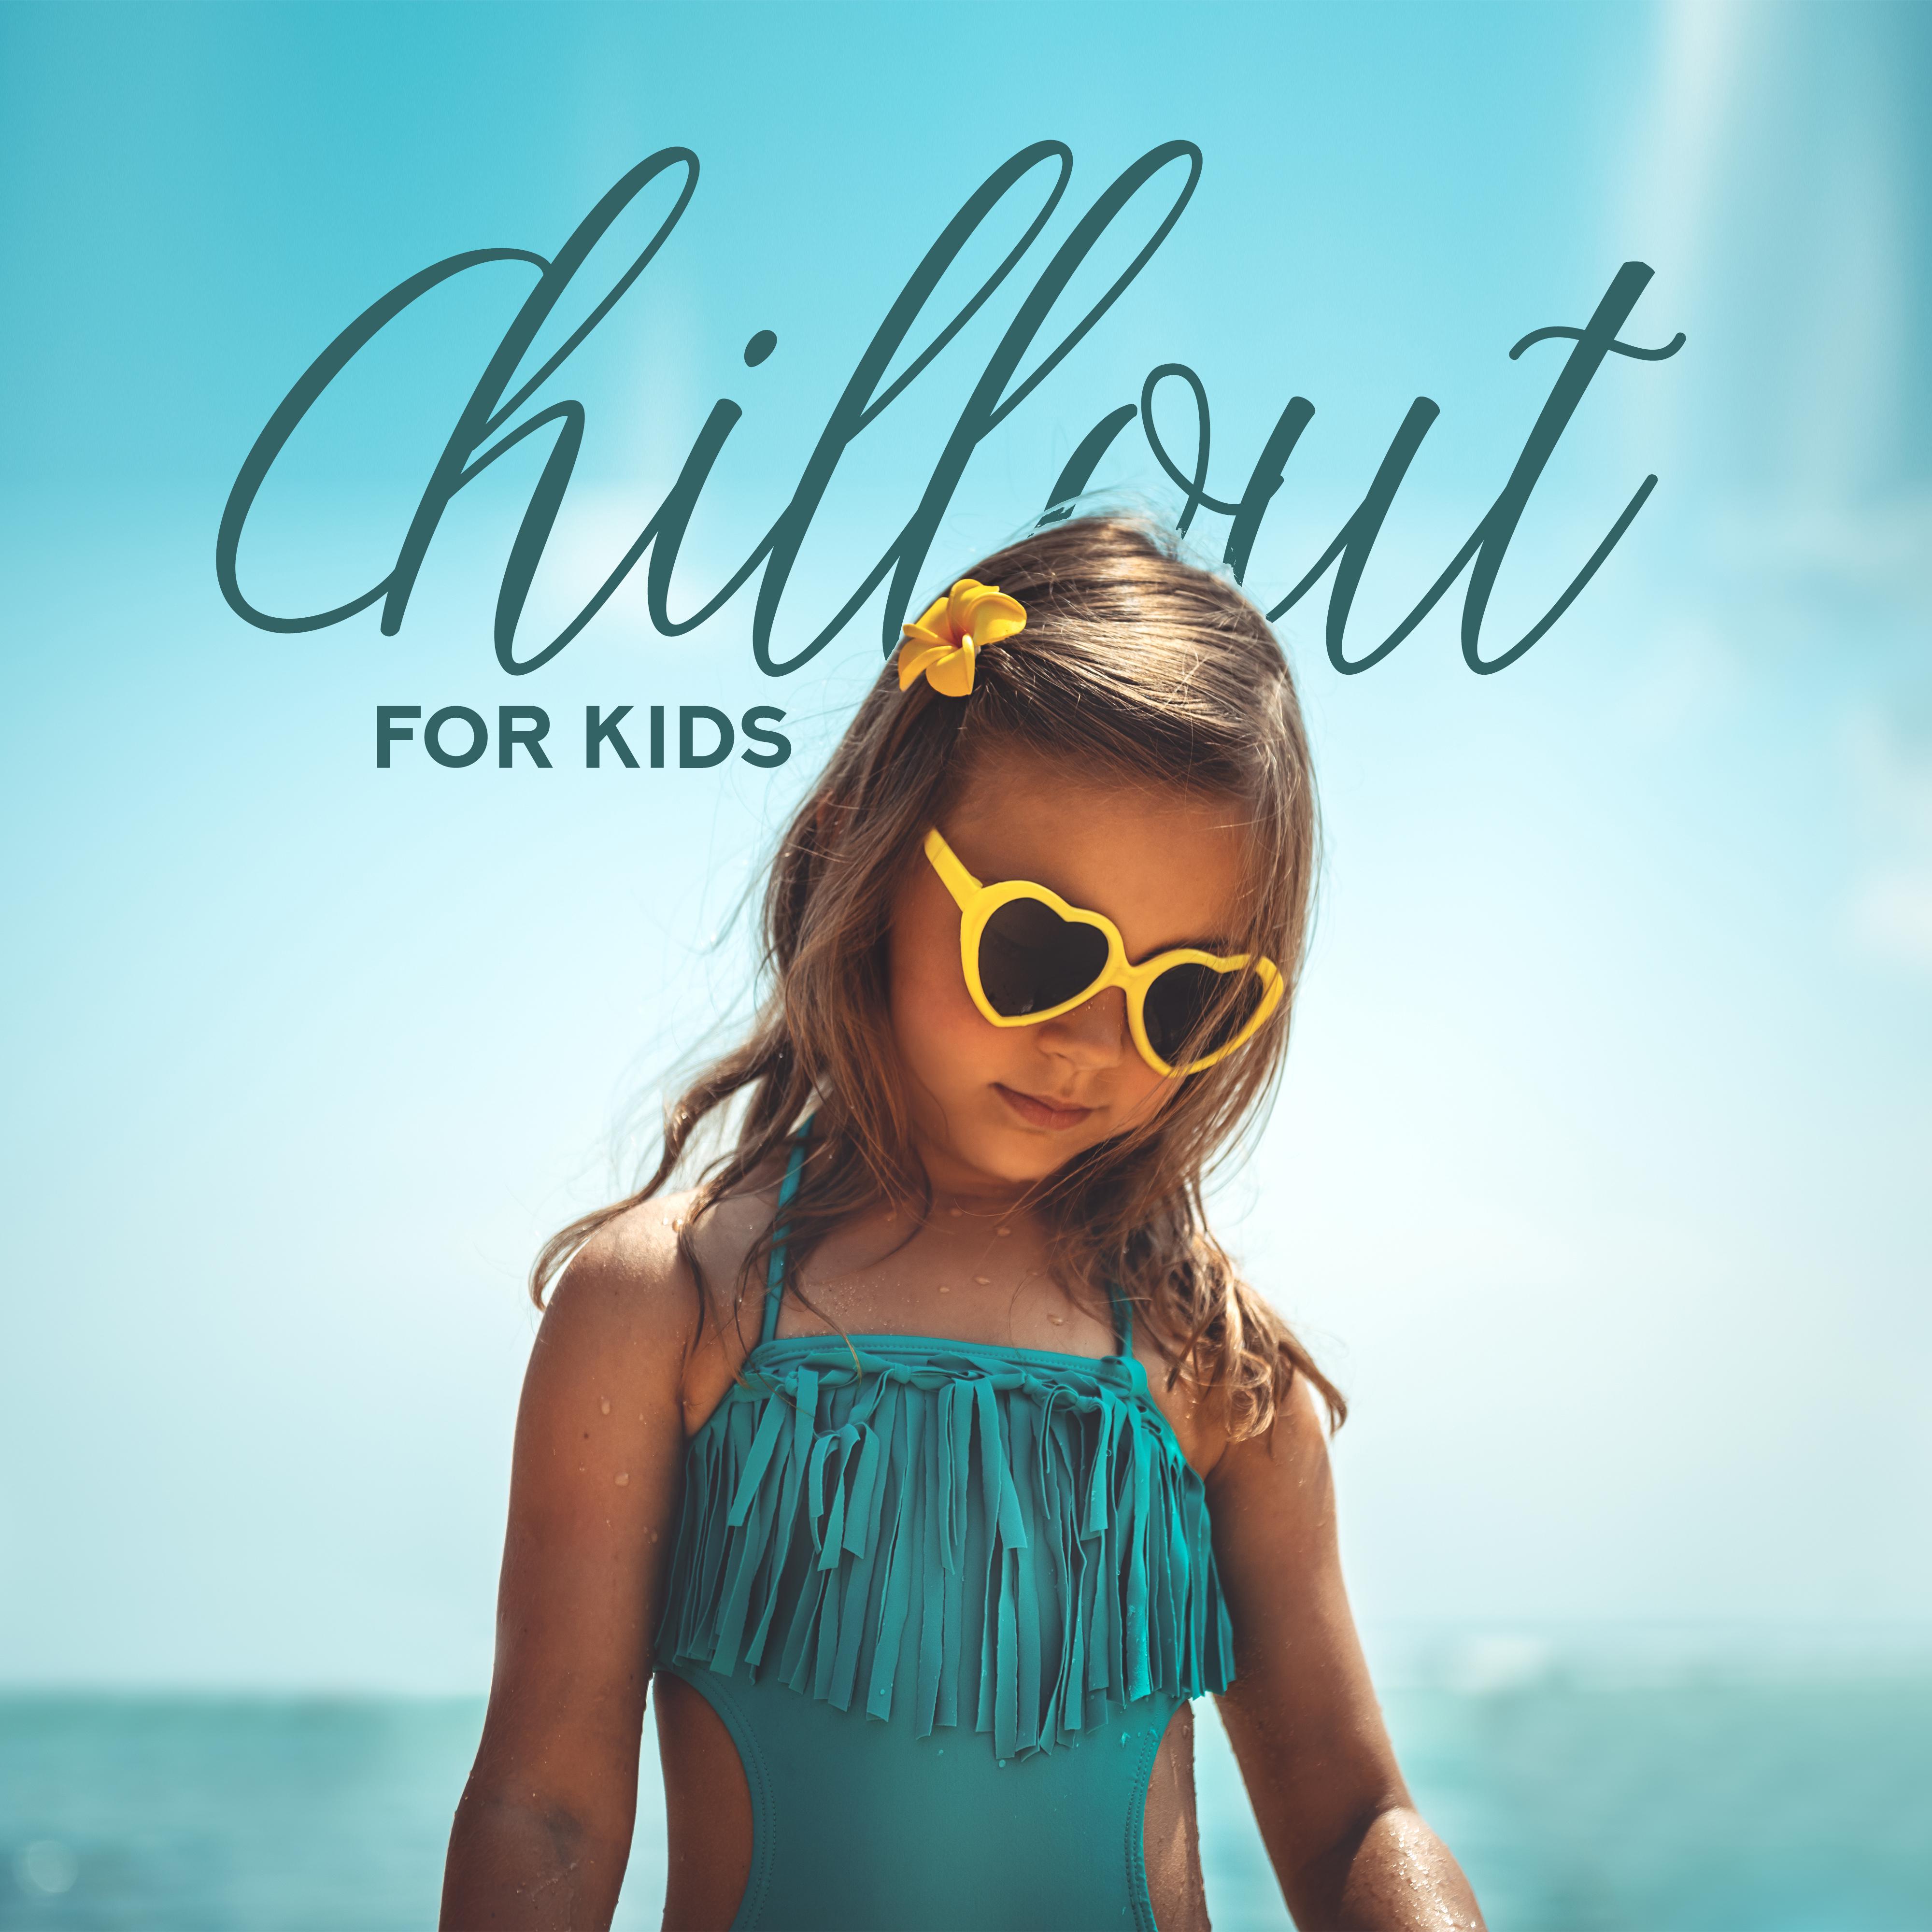 Chillout for Kids - Positive Chillout Songs Created with Children in Mind